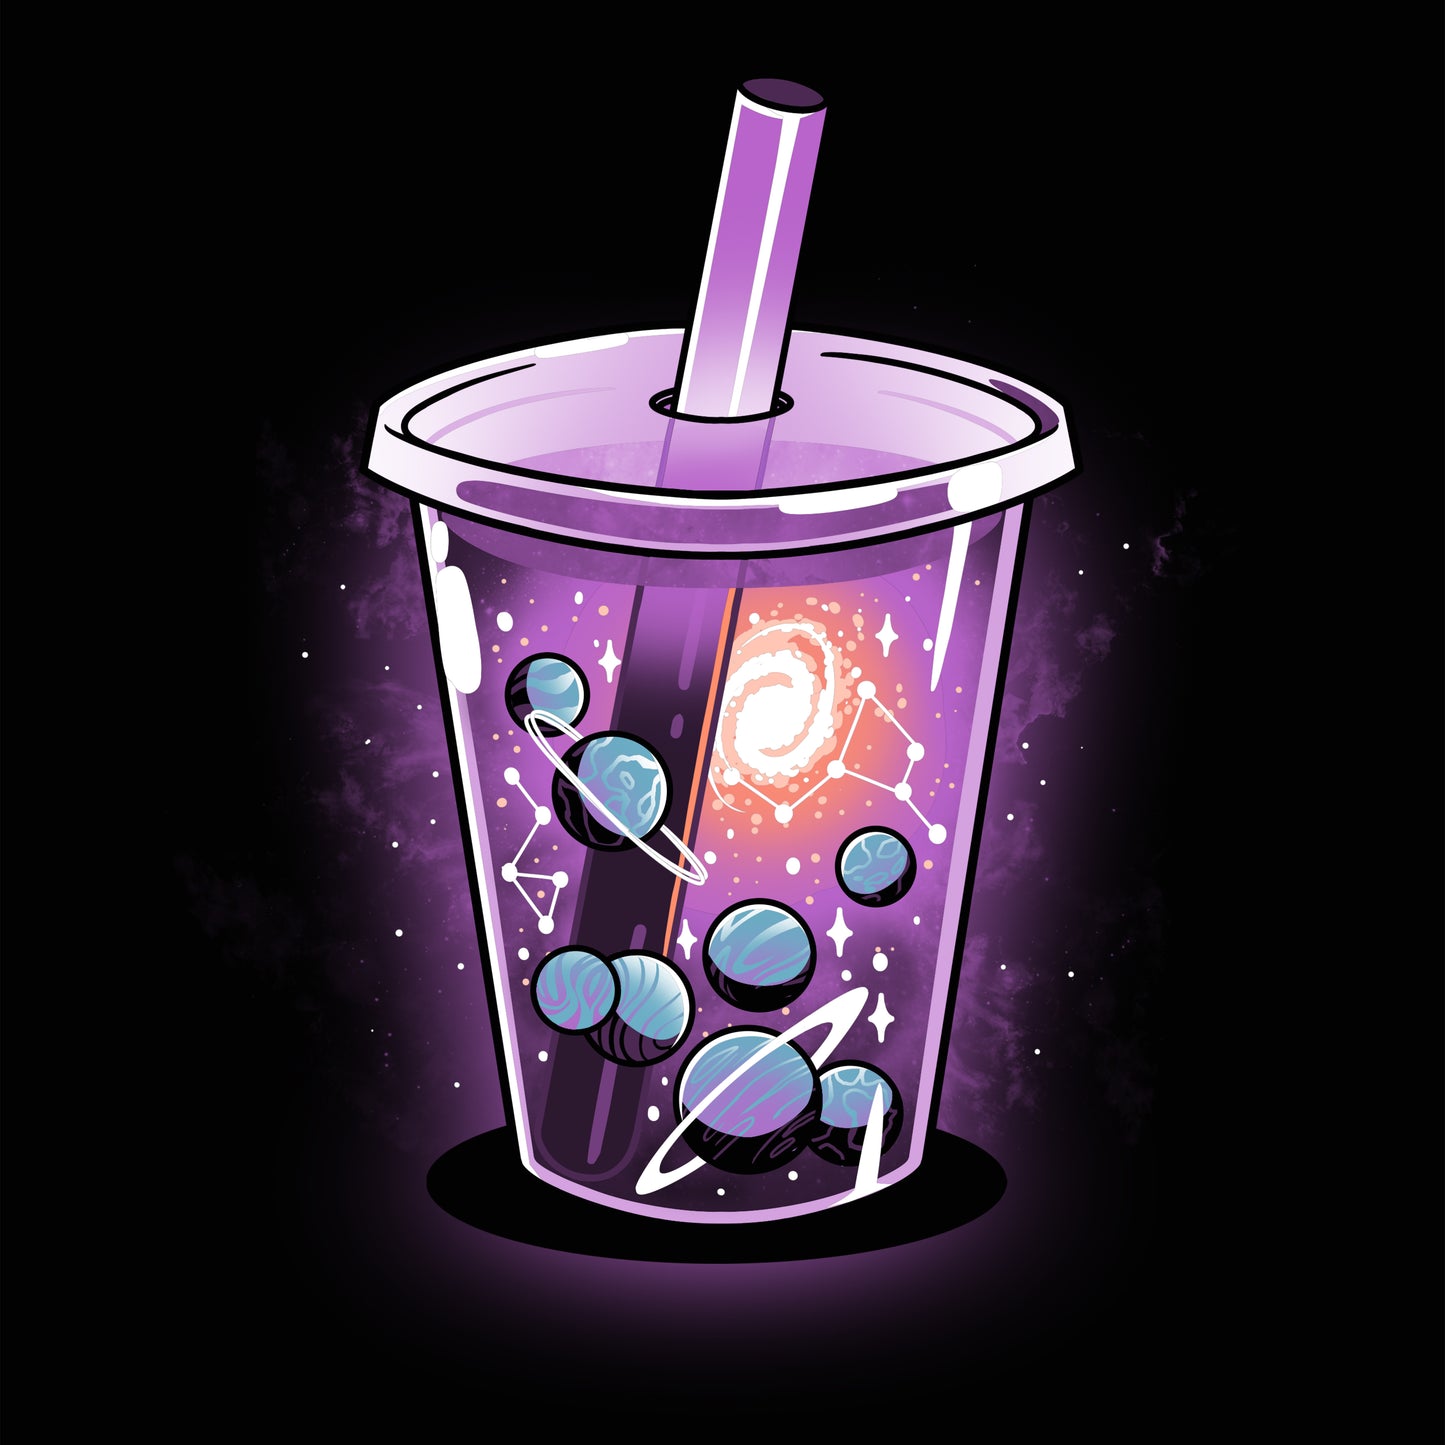 A Milk-Tea Way t-shirt featuring a purple cup with bubbles on a galaxy background by TeeTurtle.